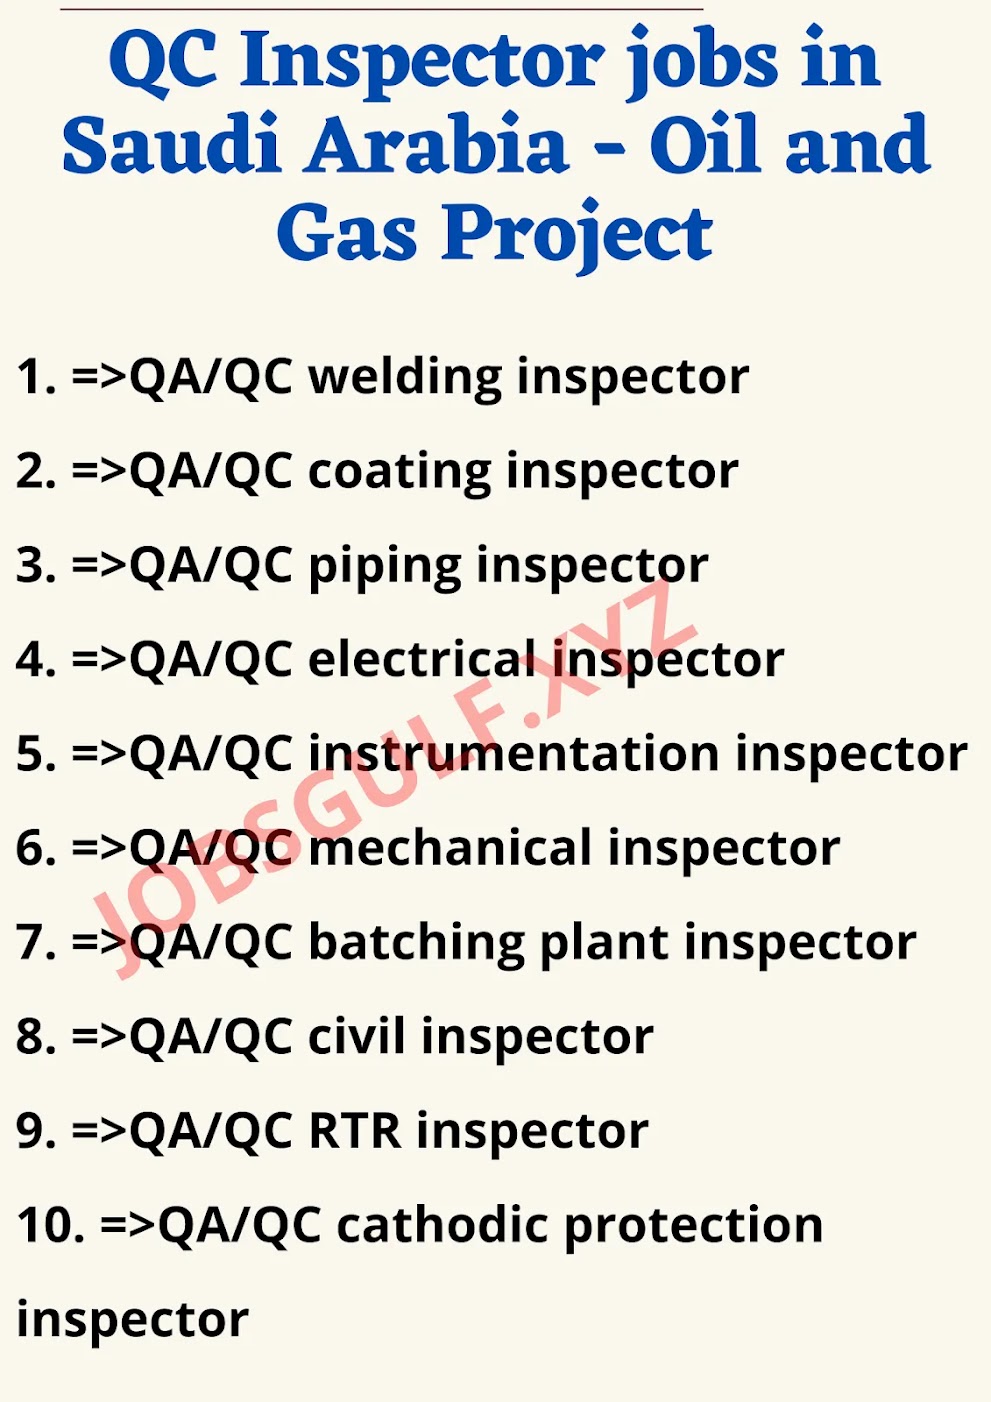 QC Inspector jobs in Saudi Arabia - Oil and Gas Project